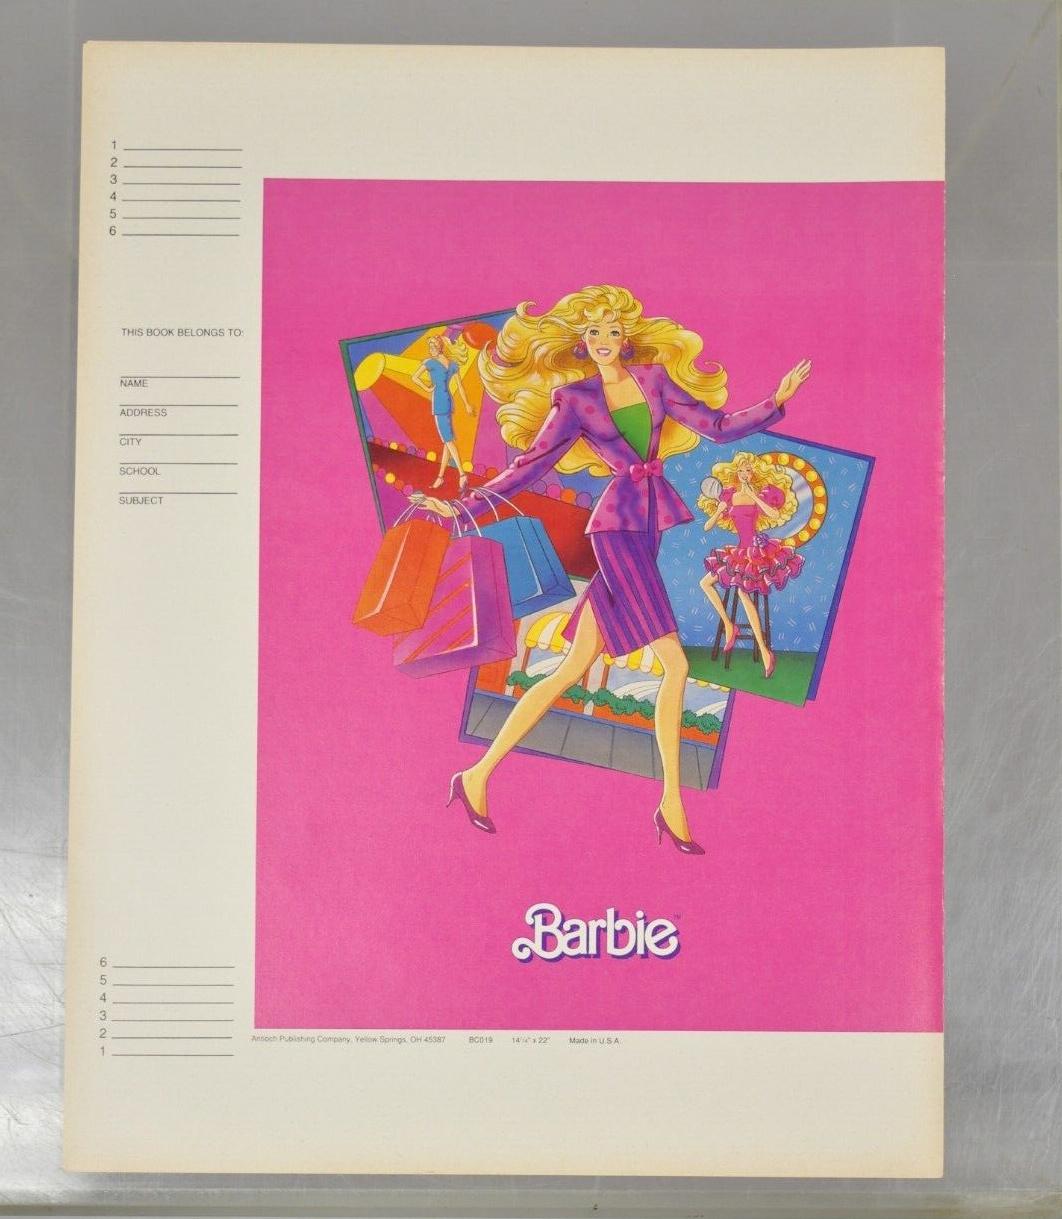 Mid-Century Modern Vintage 1989 Barbie Mattel Original Pink Paper Book Covers NOS - Many Available For Sale